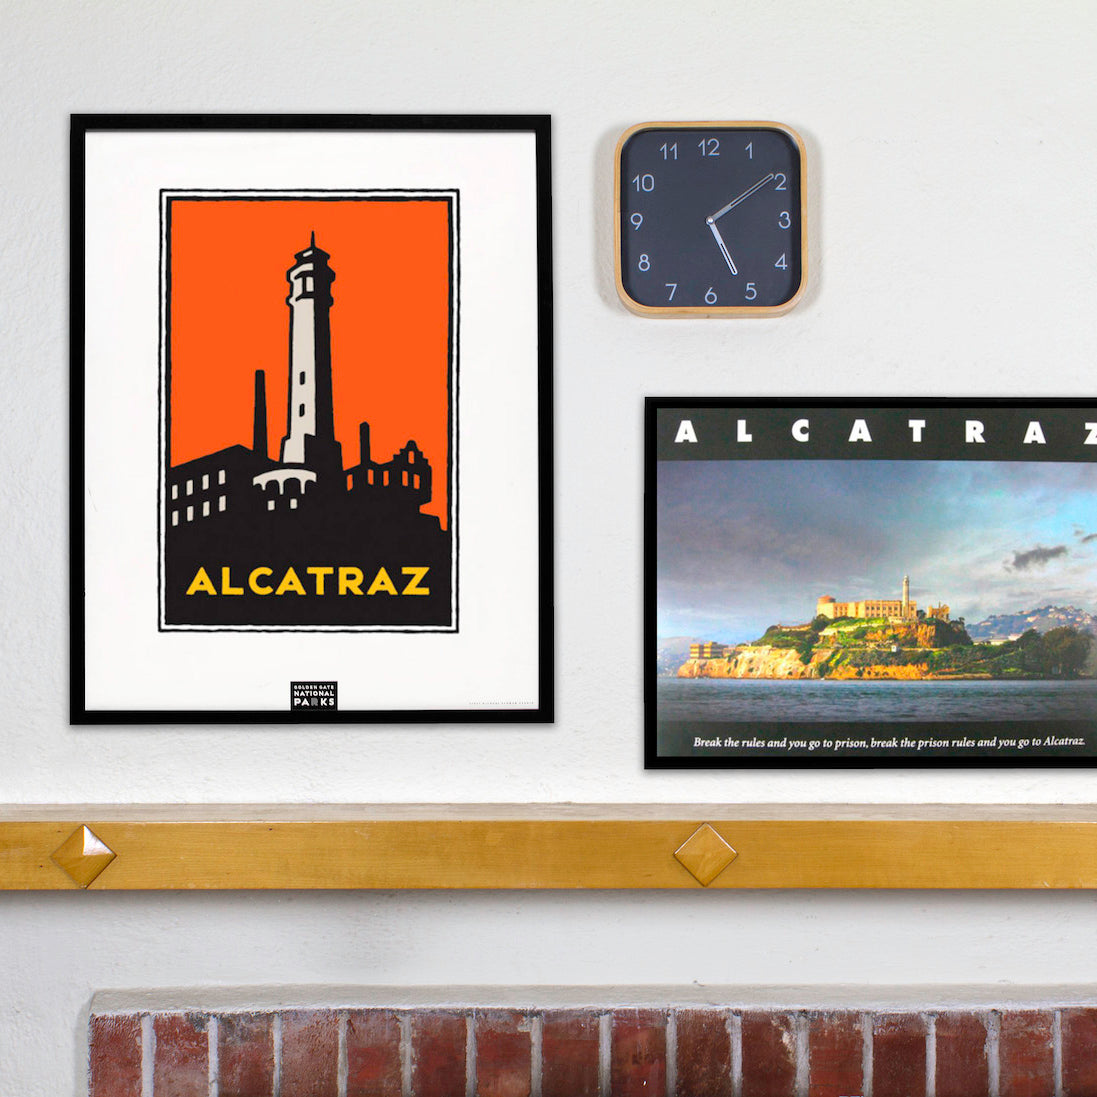 Framed Alcatraz Island posters on a white wall, with a black clock, above a wood and brick fireplace